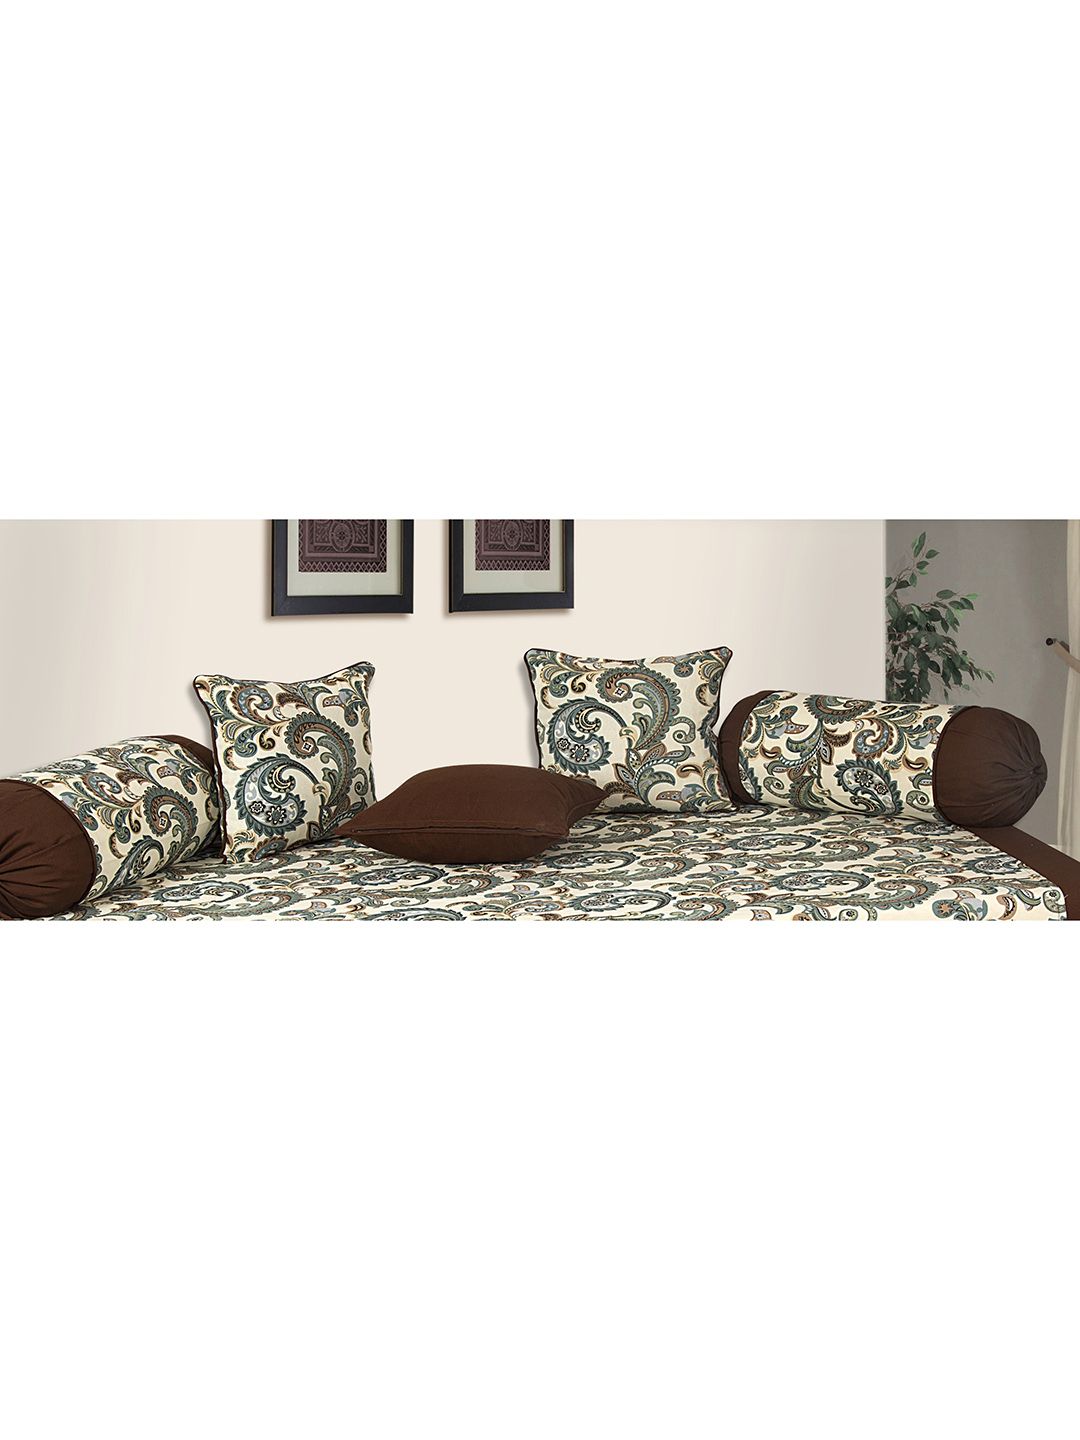 SHADES of LIFE Set Of 6 Brown Printed Woven Diwan Set With Bolsters & Cushions Price in India